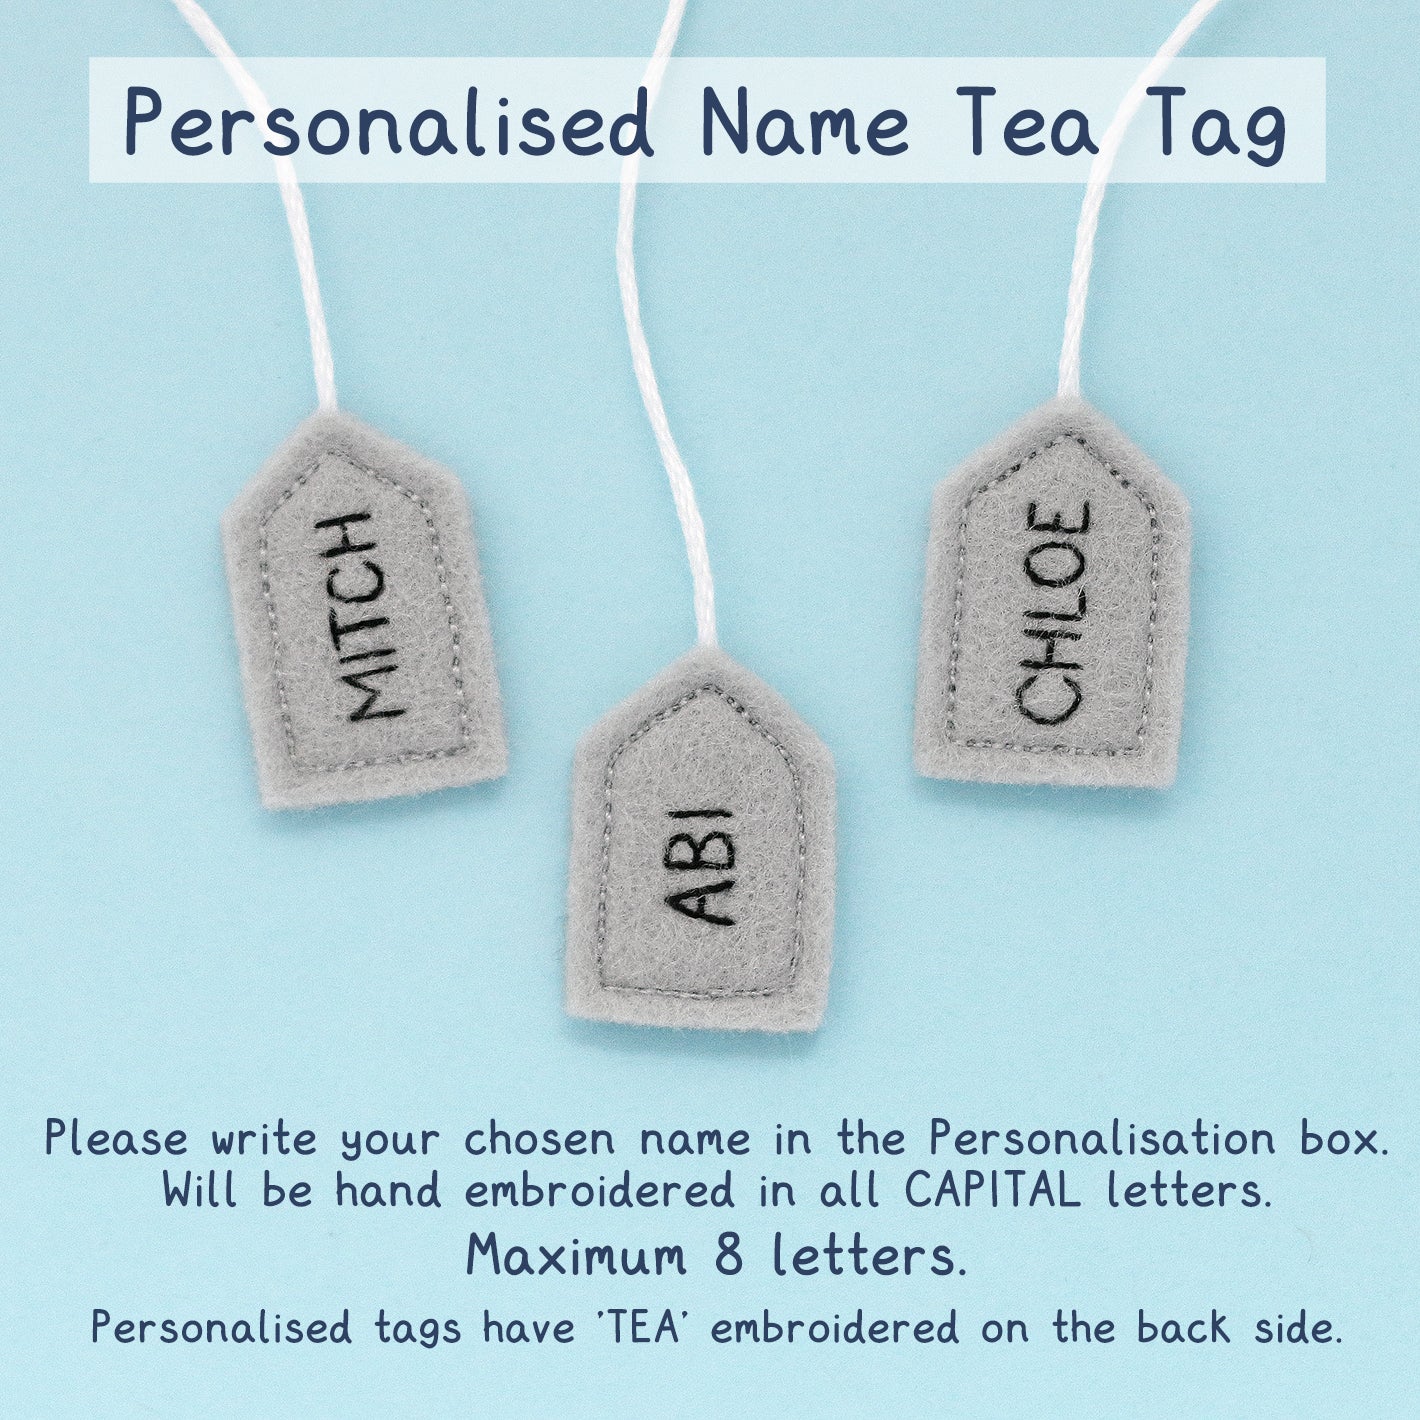 Personalised Mint Teacup Pincushion